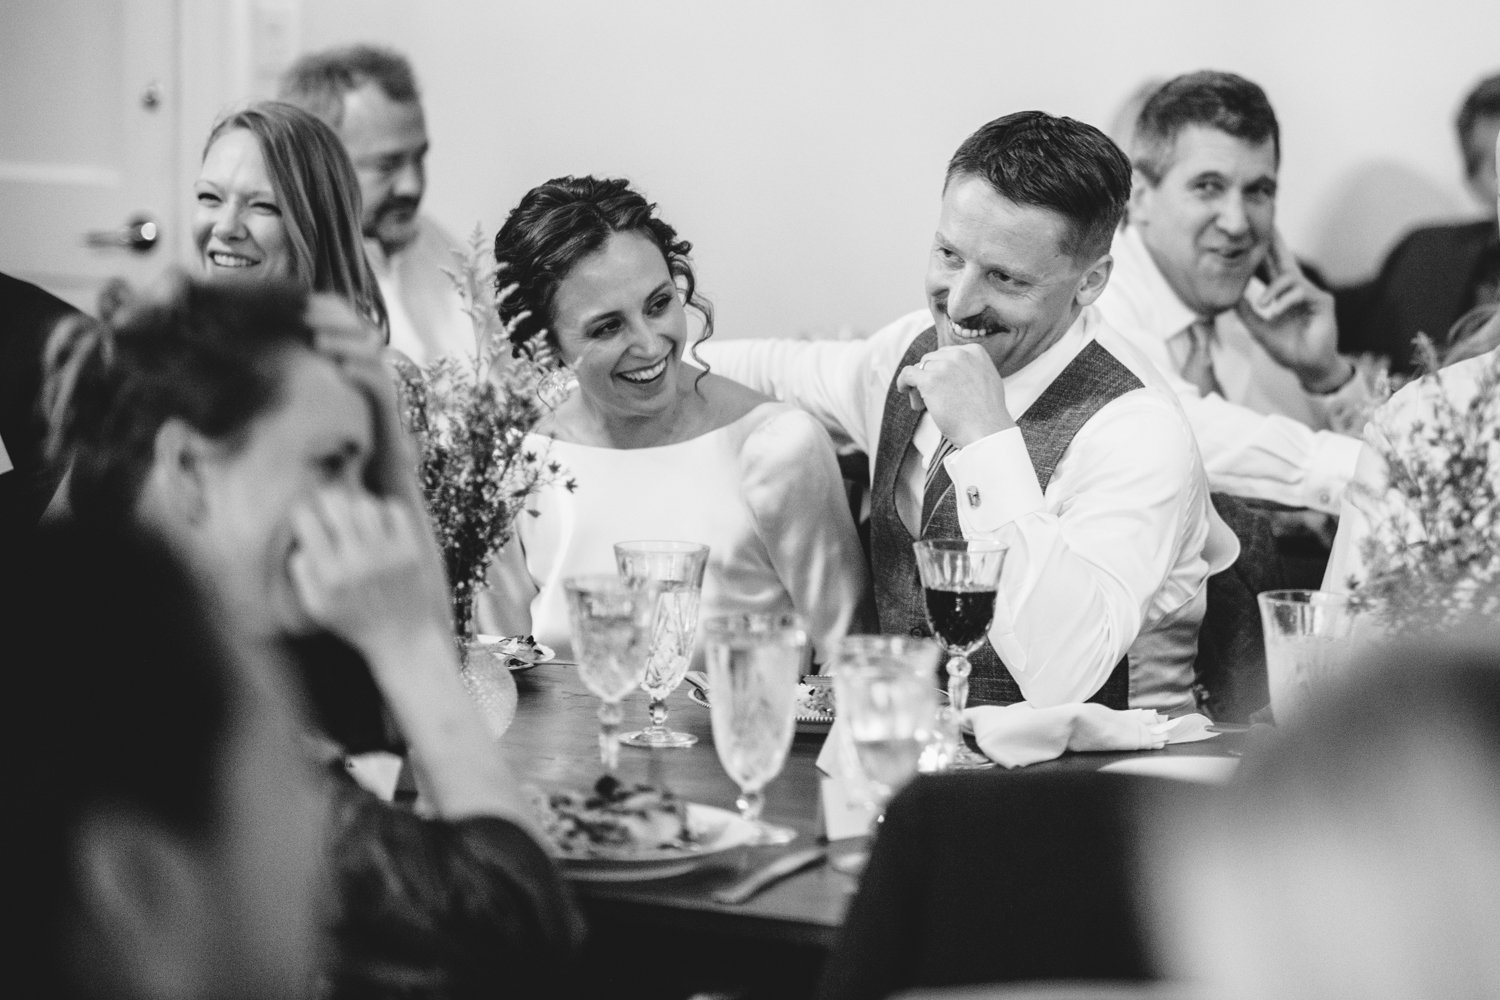 Groom has his arm around the bride as they both laugh and smile, seated among smiling wedding guests.

Upstate New York Wedding Photography. Cold Spring NY Wedding Photography. Luxury Local Wedding Photographer. Destination Wedding Photographer.